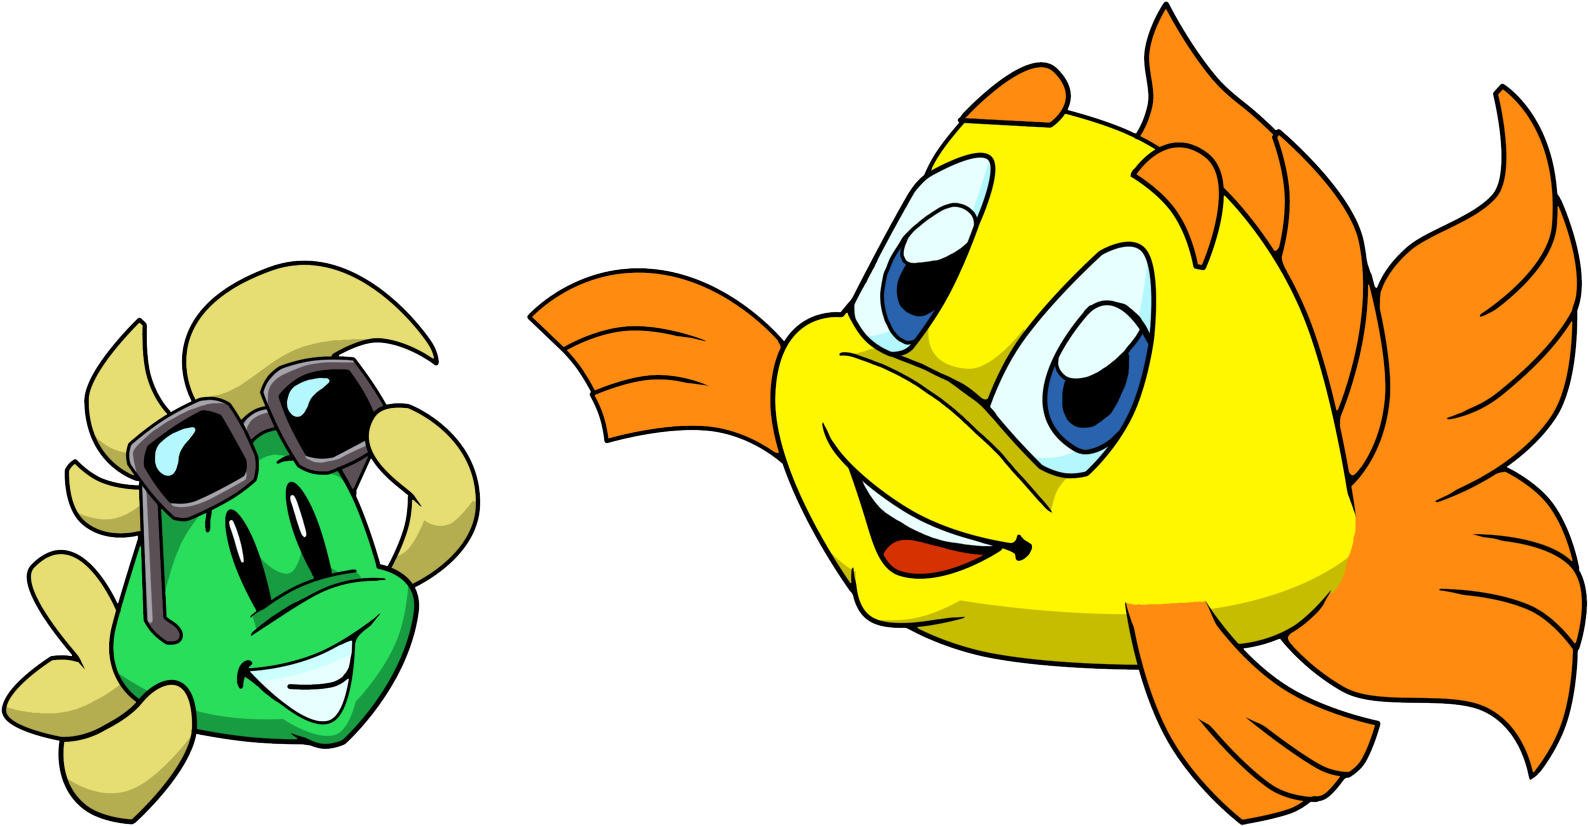 Played This Computer Game As A Kid - Freddi The Fish (1925x1588)